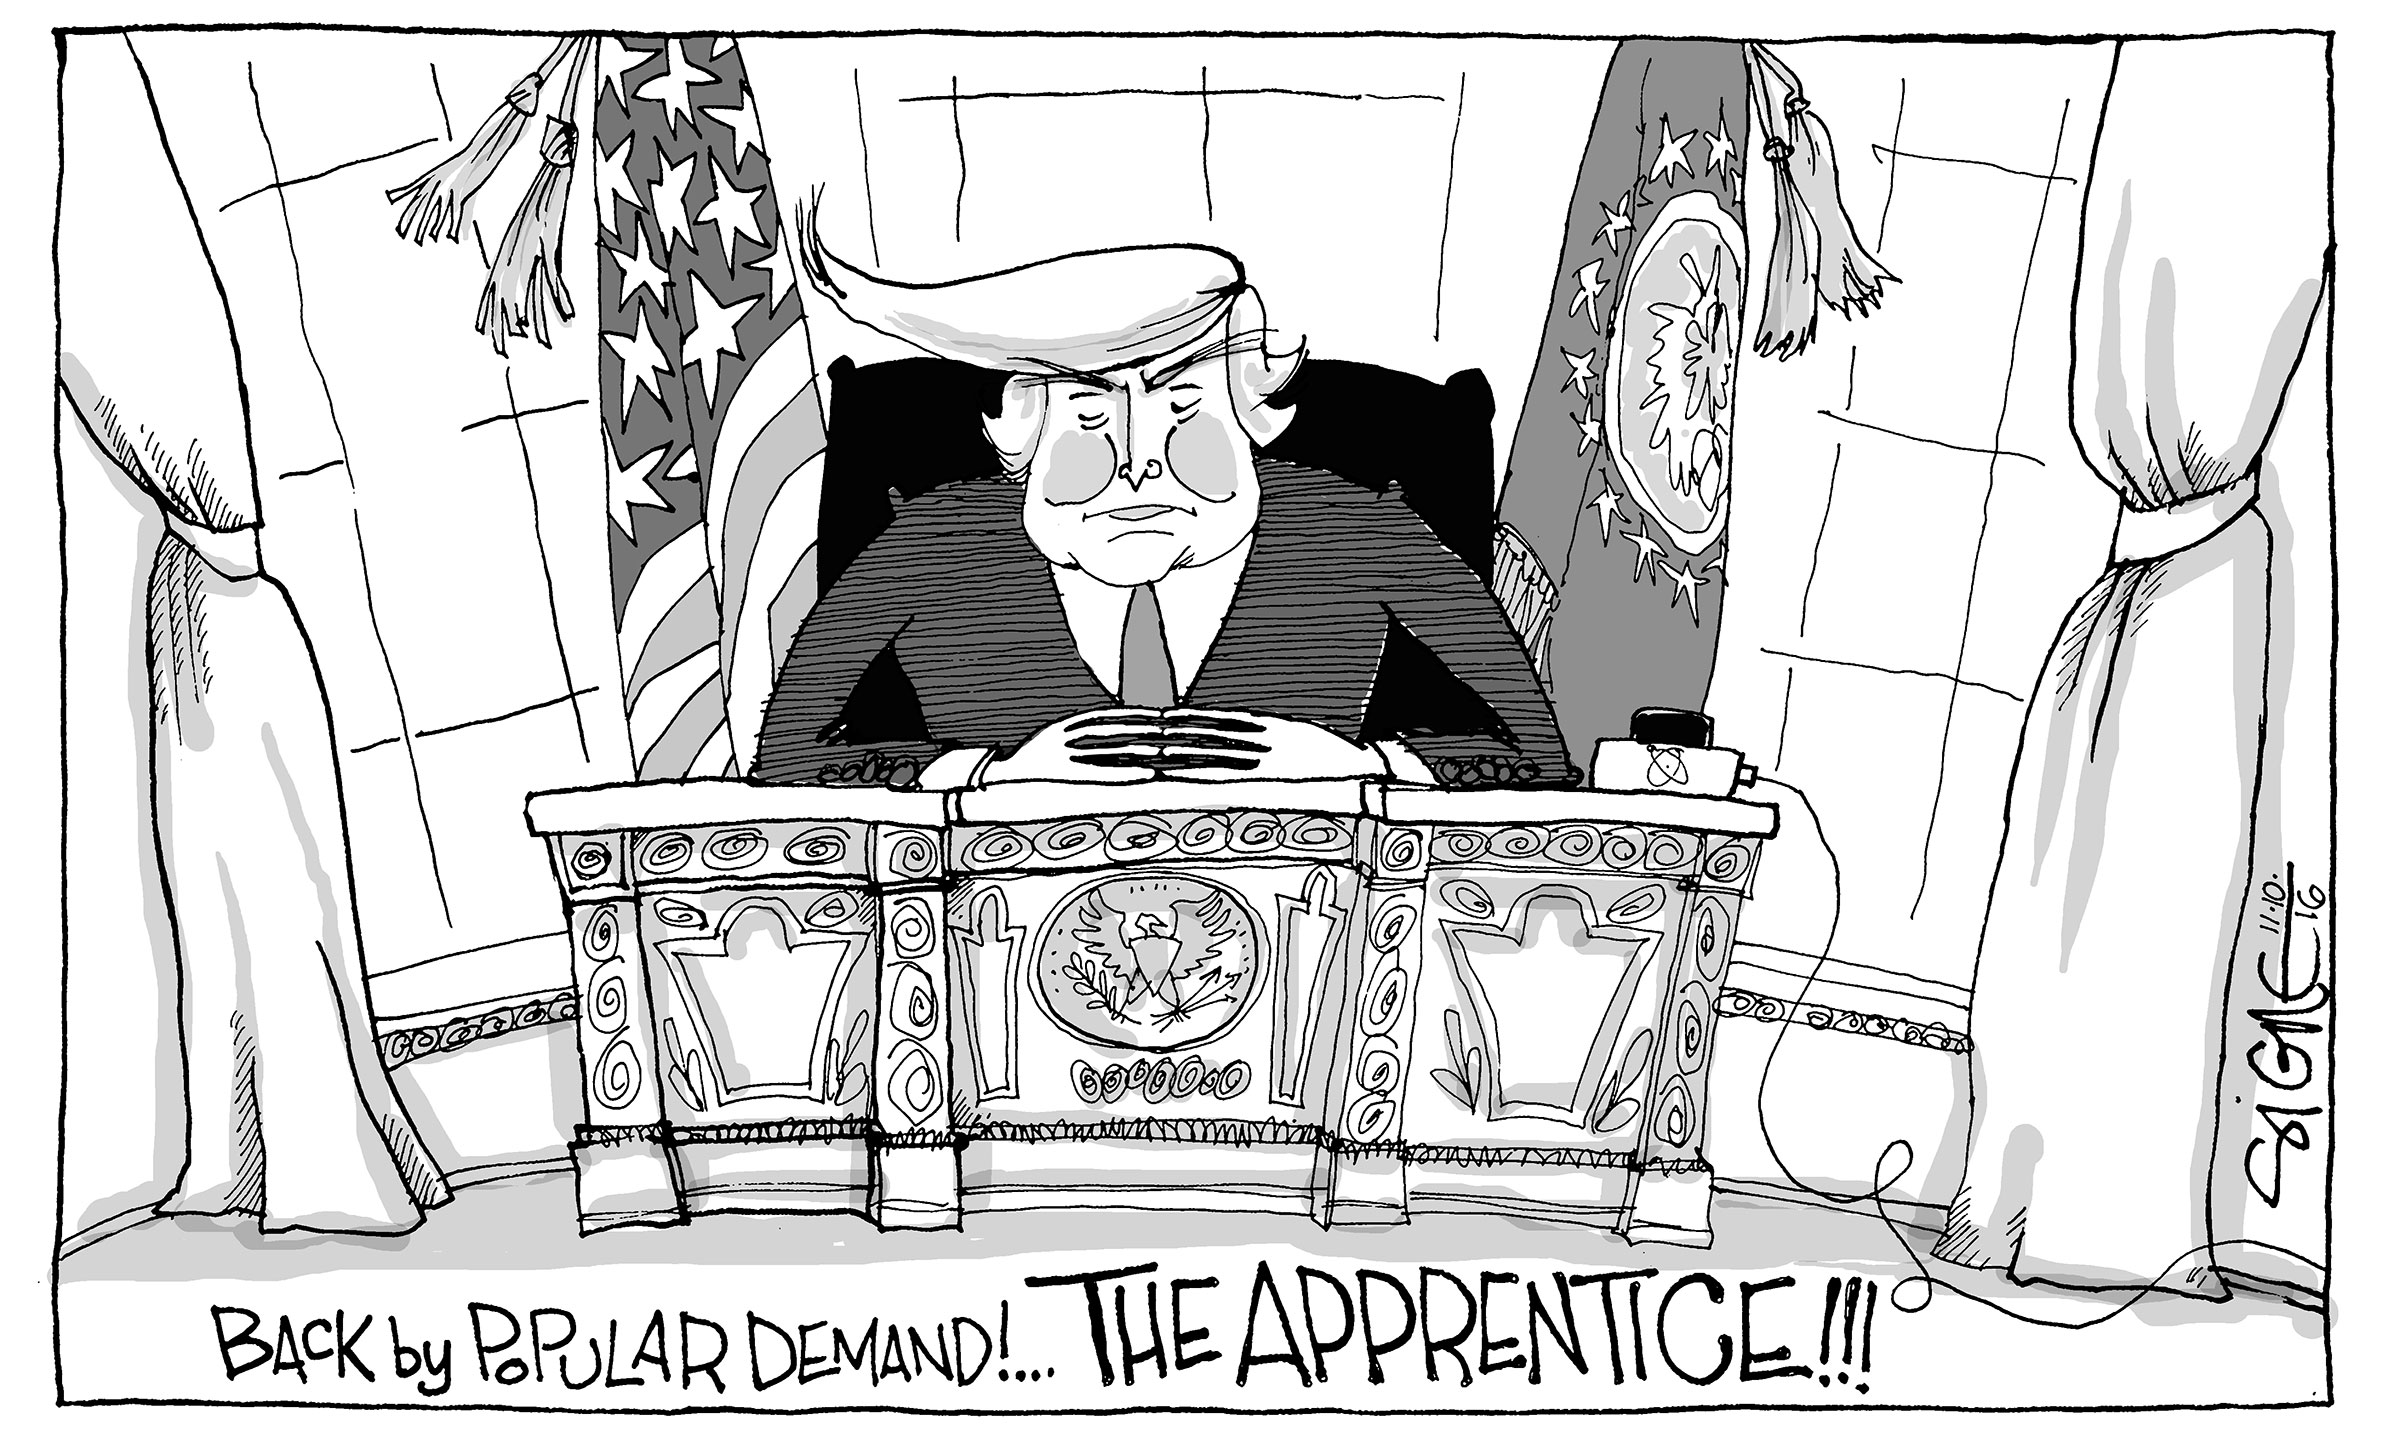 Donald Trump in the oval office.  Caption:  Back by popular demand! . . . THE APPRENTICE!